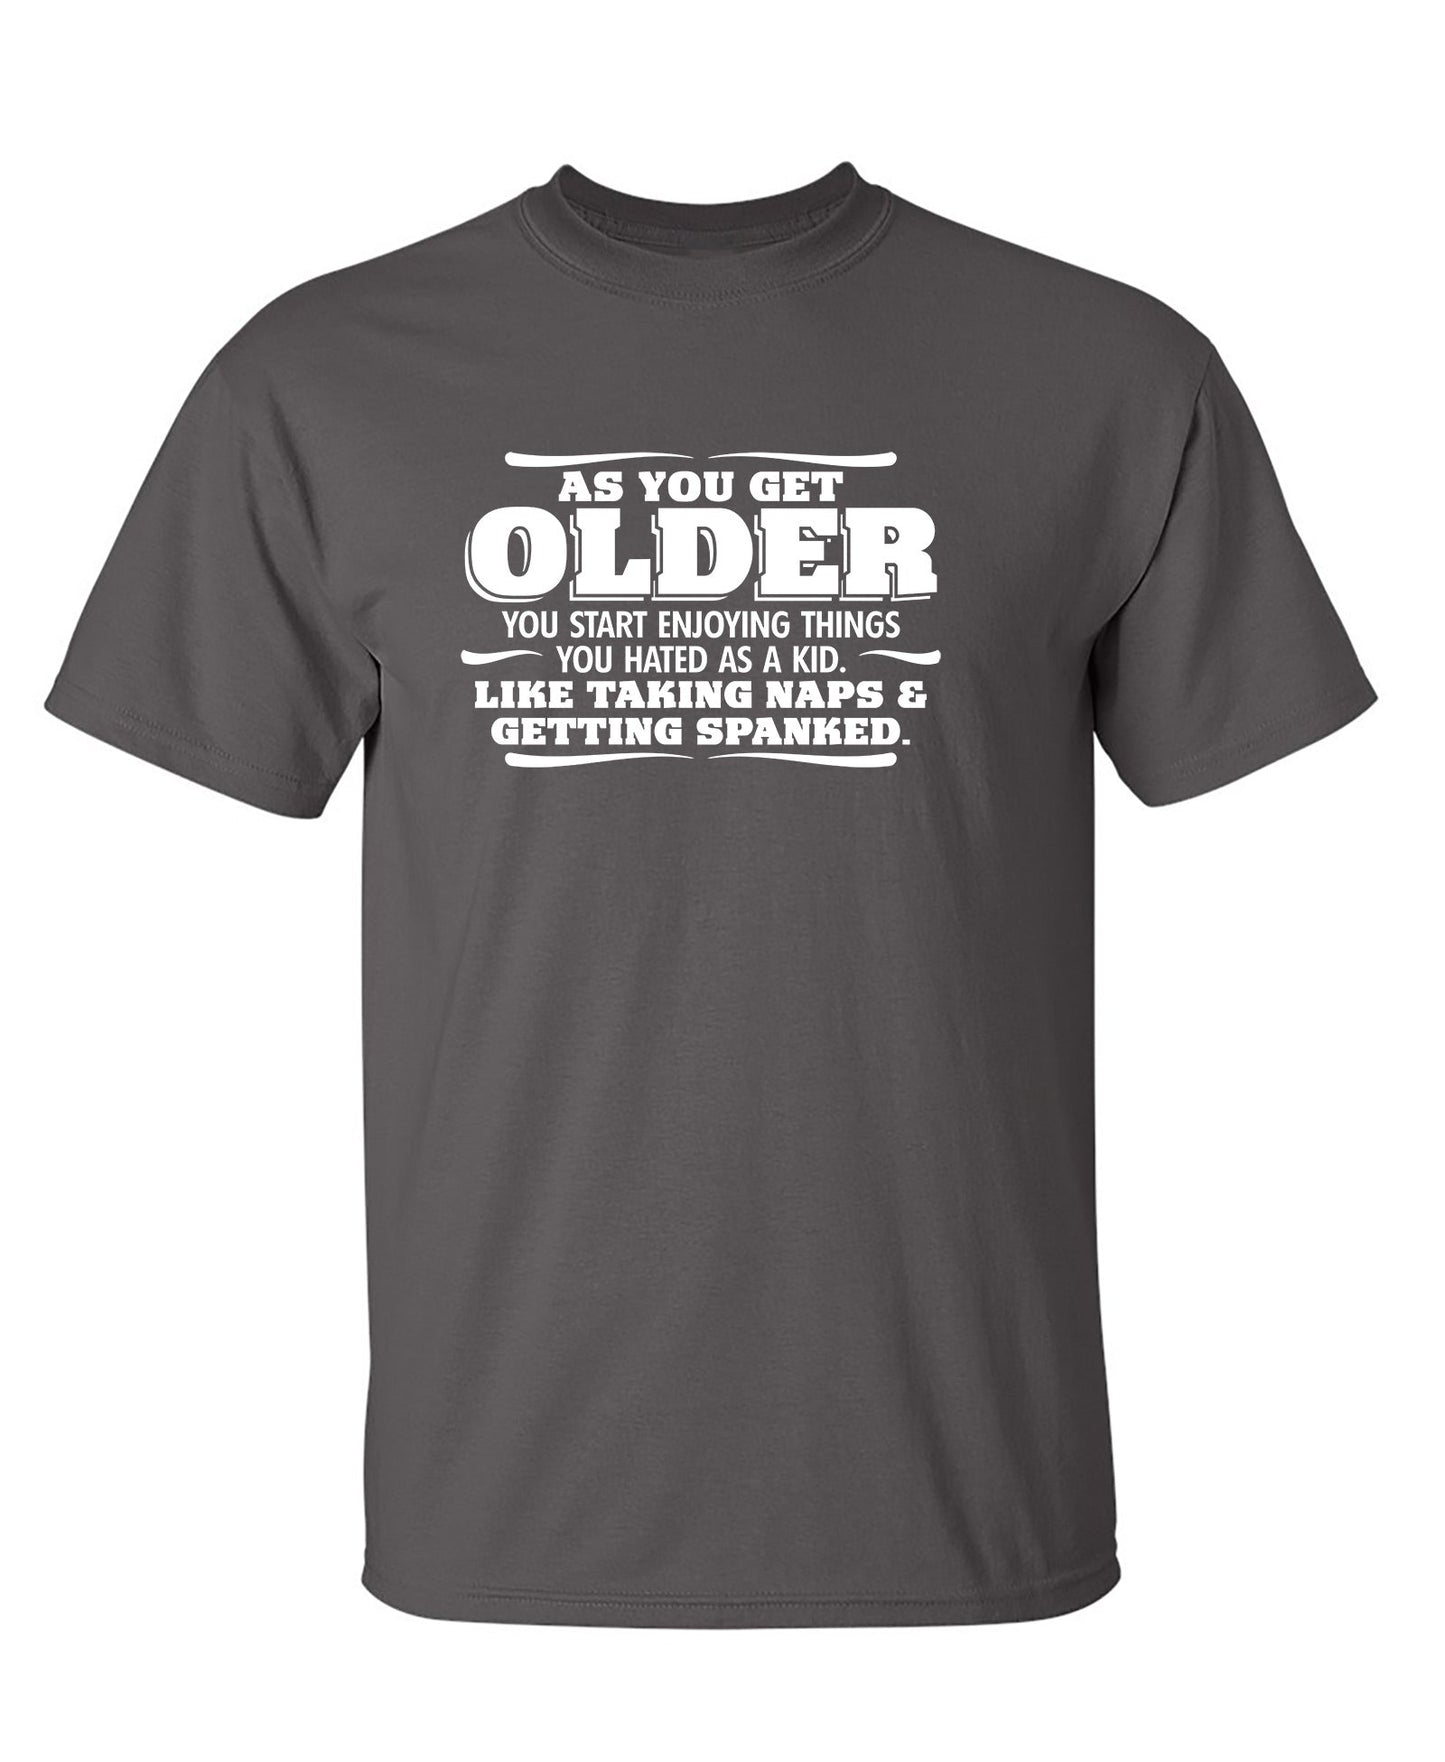 As You Get Older Enjoy Taking Naps and Getting Spanked - Funny T Shirts & Graphic Tees